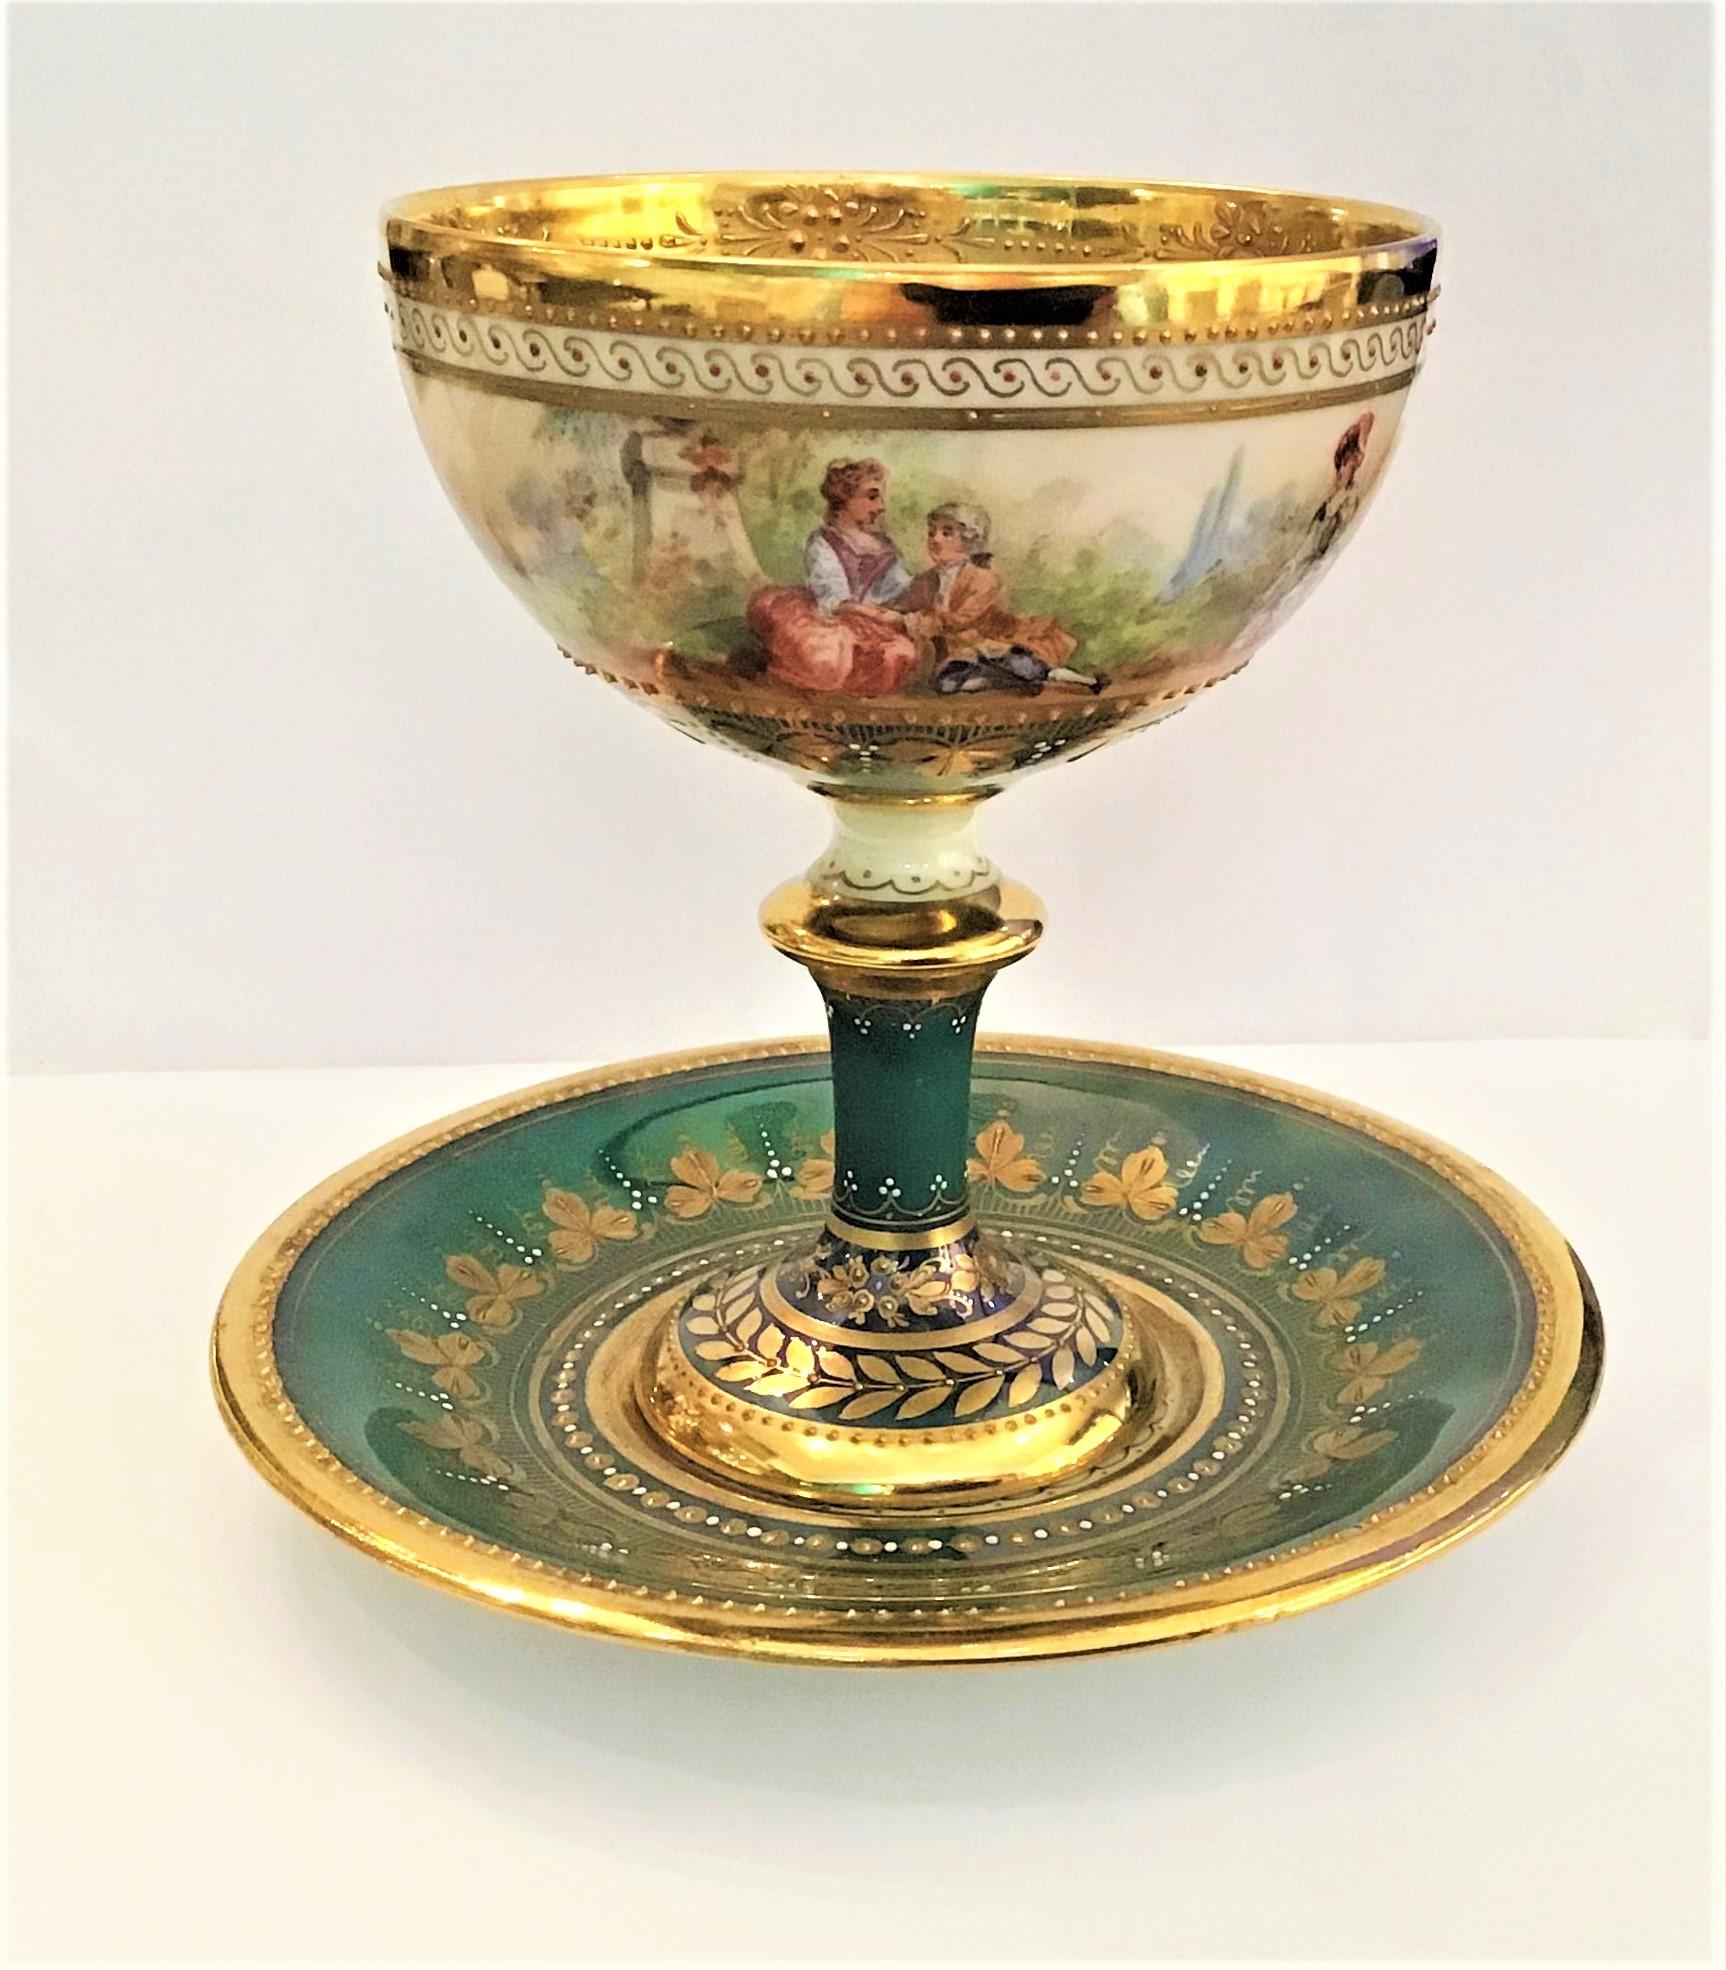 Amazing Dresden Ambrosius Lamm Luster green courting couple hand painted pedestal cup and saucer, circa 1910.

Magnificent porcelain pedestal cup and saucer with panoramic painting of courting scenes and raised gold decoration inside the cup.